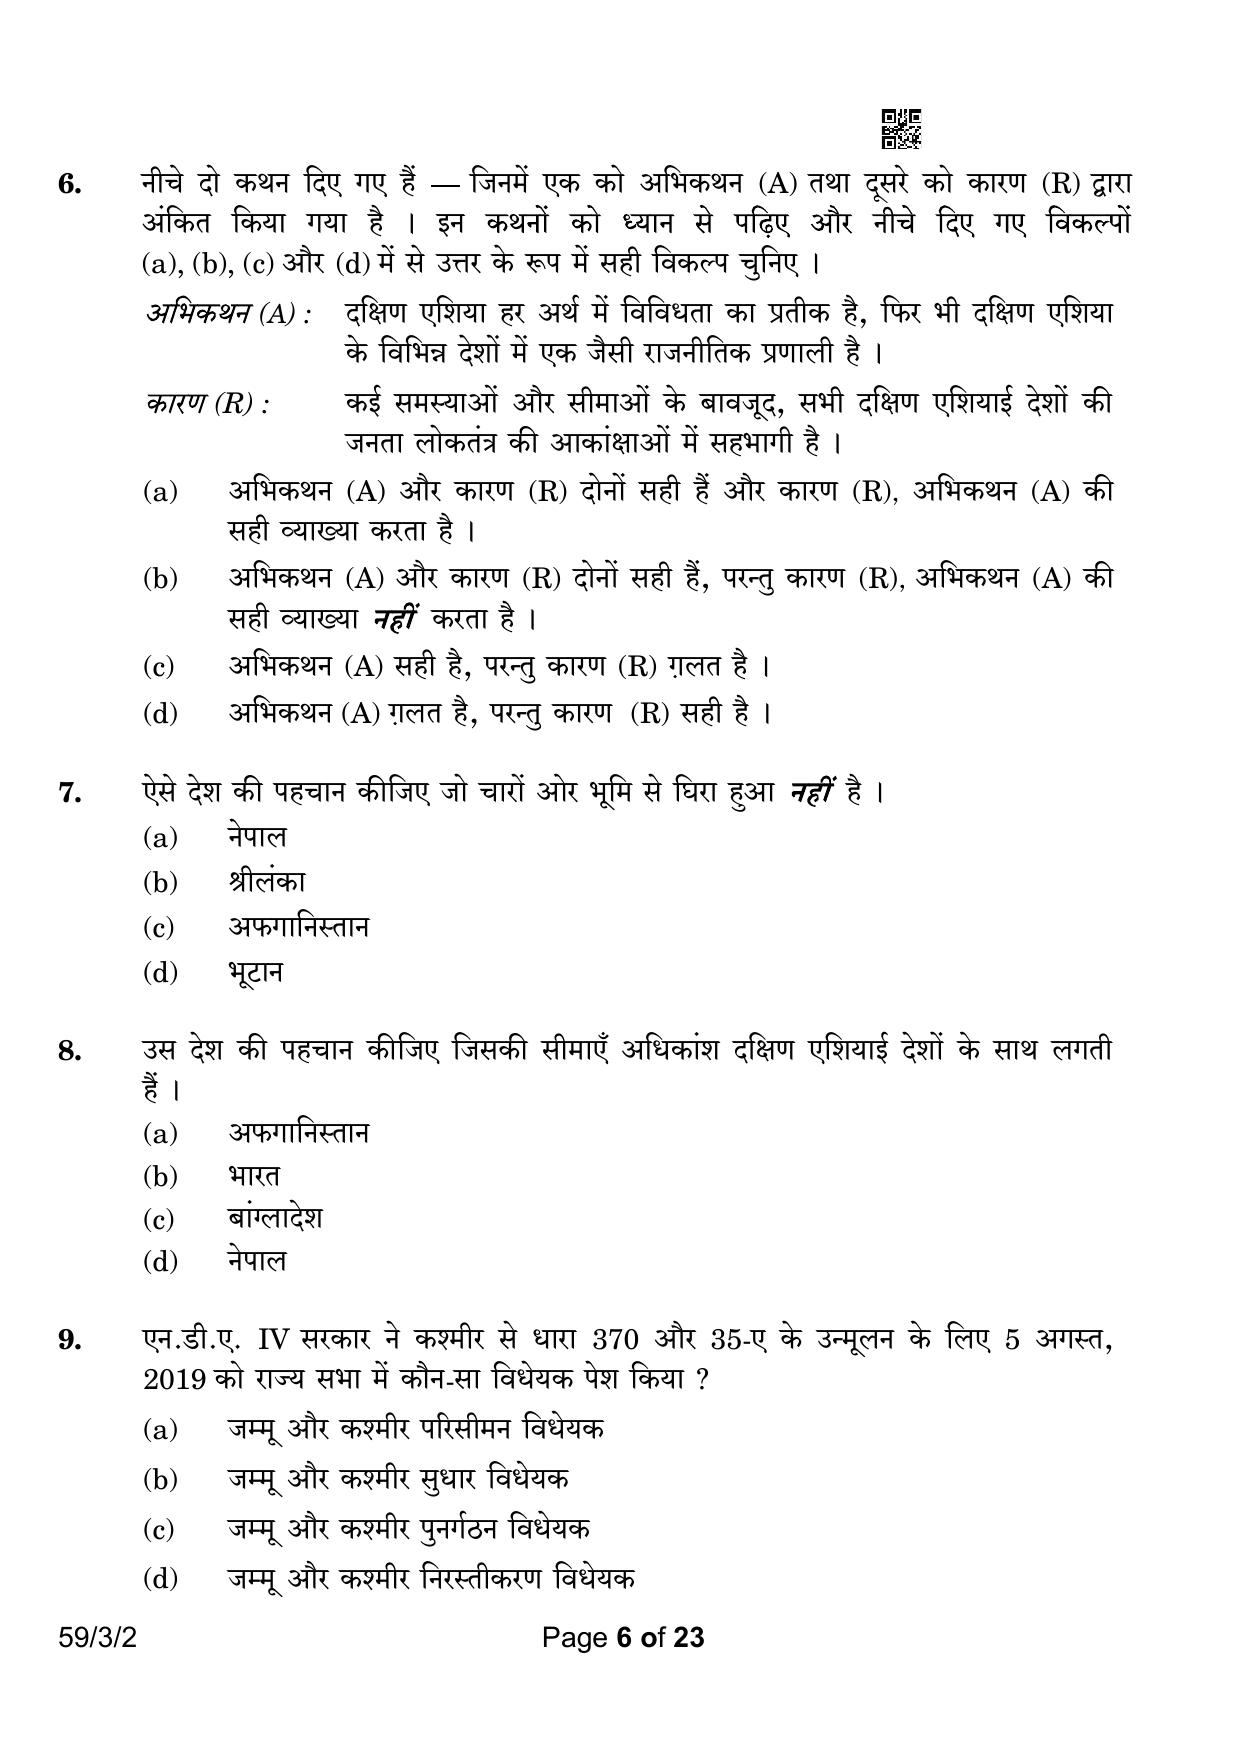 CBSE Class 12 59-3-2 Political Science 2023 Question Paper - Page 6